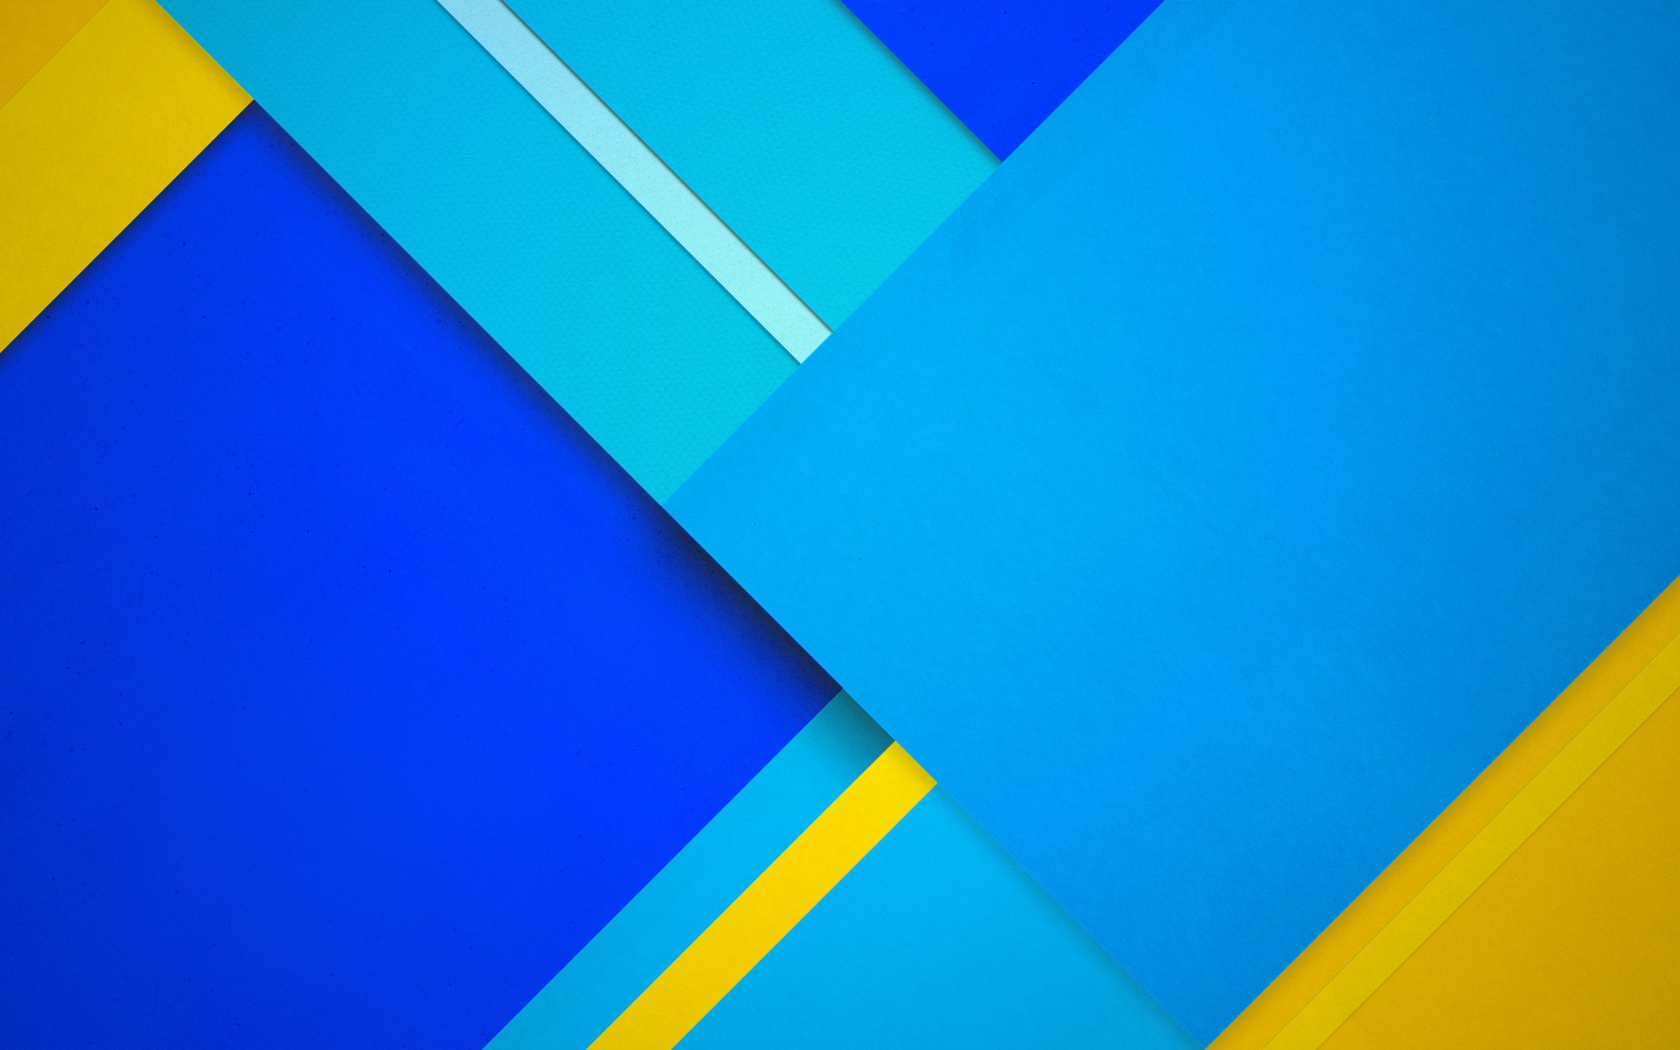 Blue and yellow shapes 3D graphics